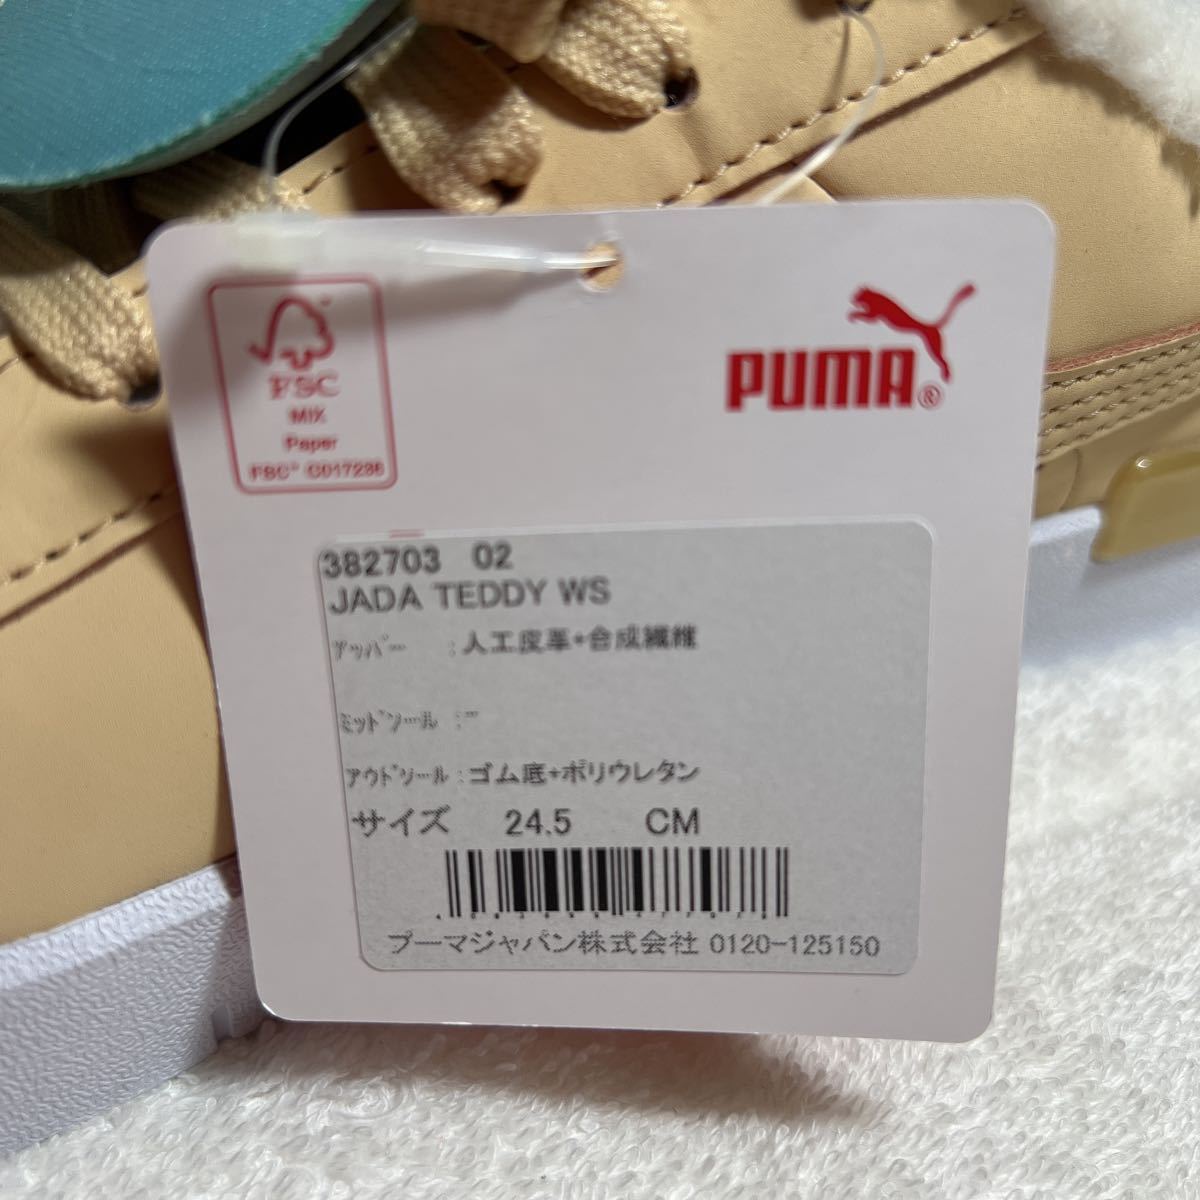 *PUMA Jada Teddy WS { product number 382703 02}SOFTFORM+ inside boa lining low cut shoes [ beige group ]23.5cm correspondence size ( absolute size 24.5cm)B*